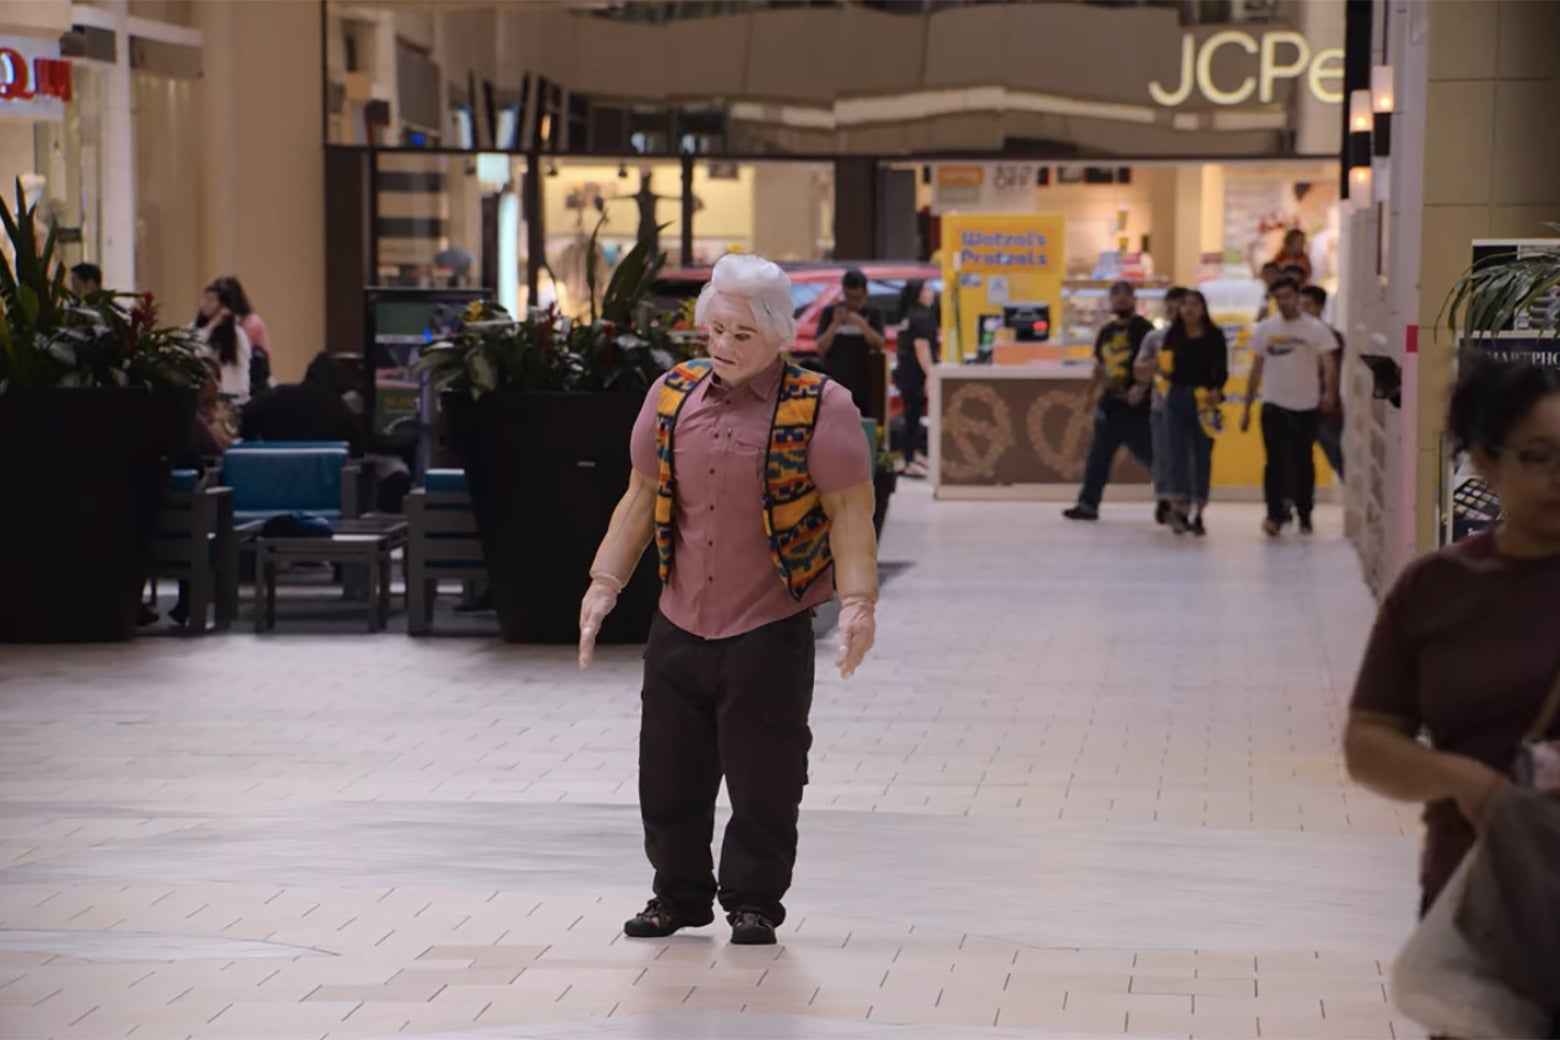 A man in an ill-fitting body suit in the middle of a mall.